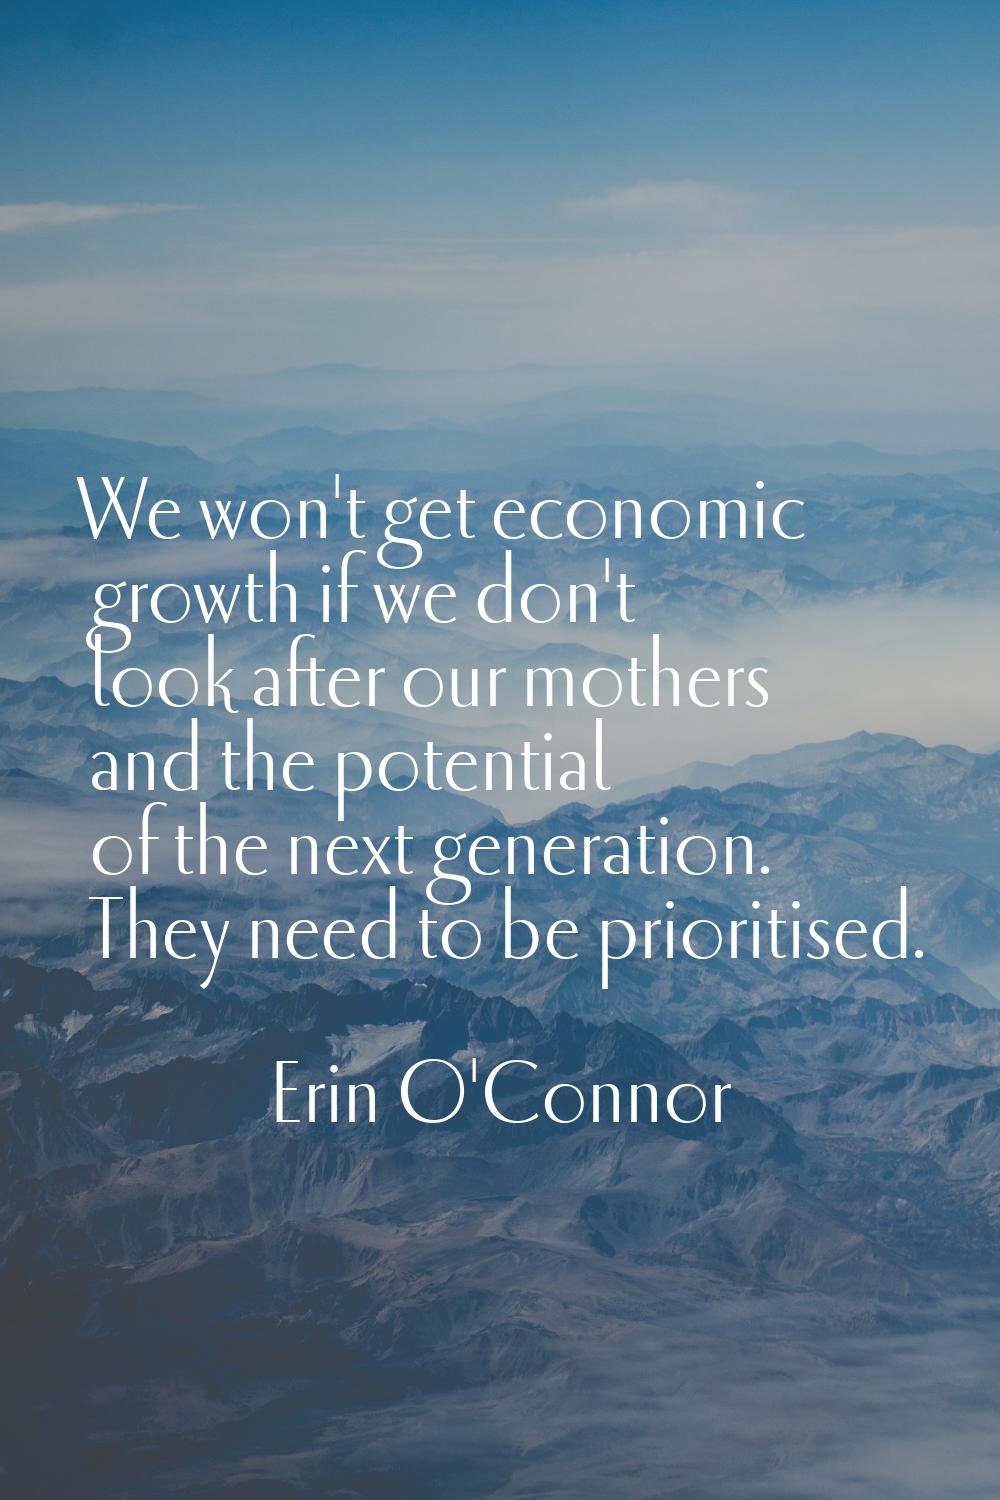 We won't get economic growth if we don't look after our mothers and the potential of the next gener